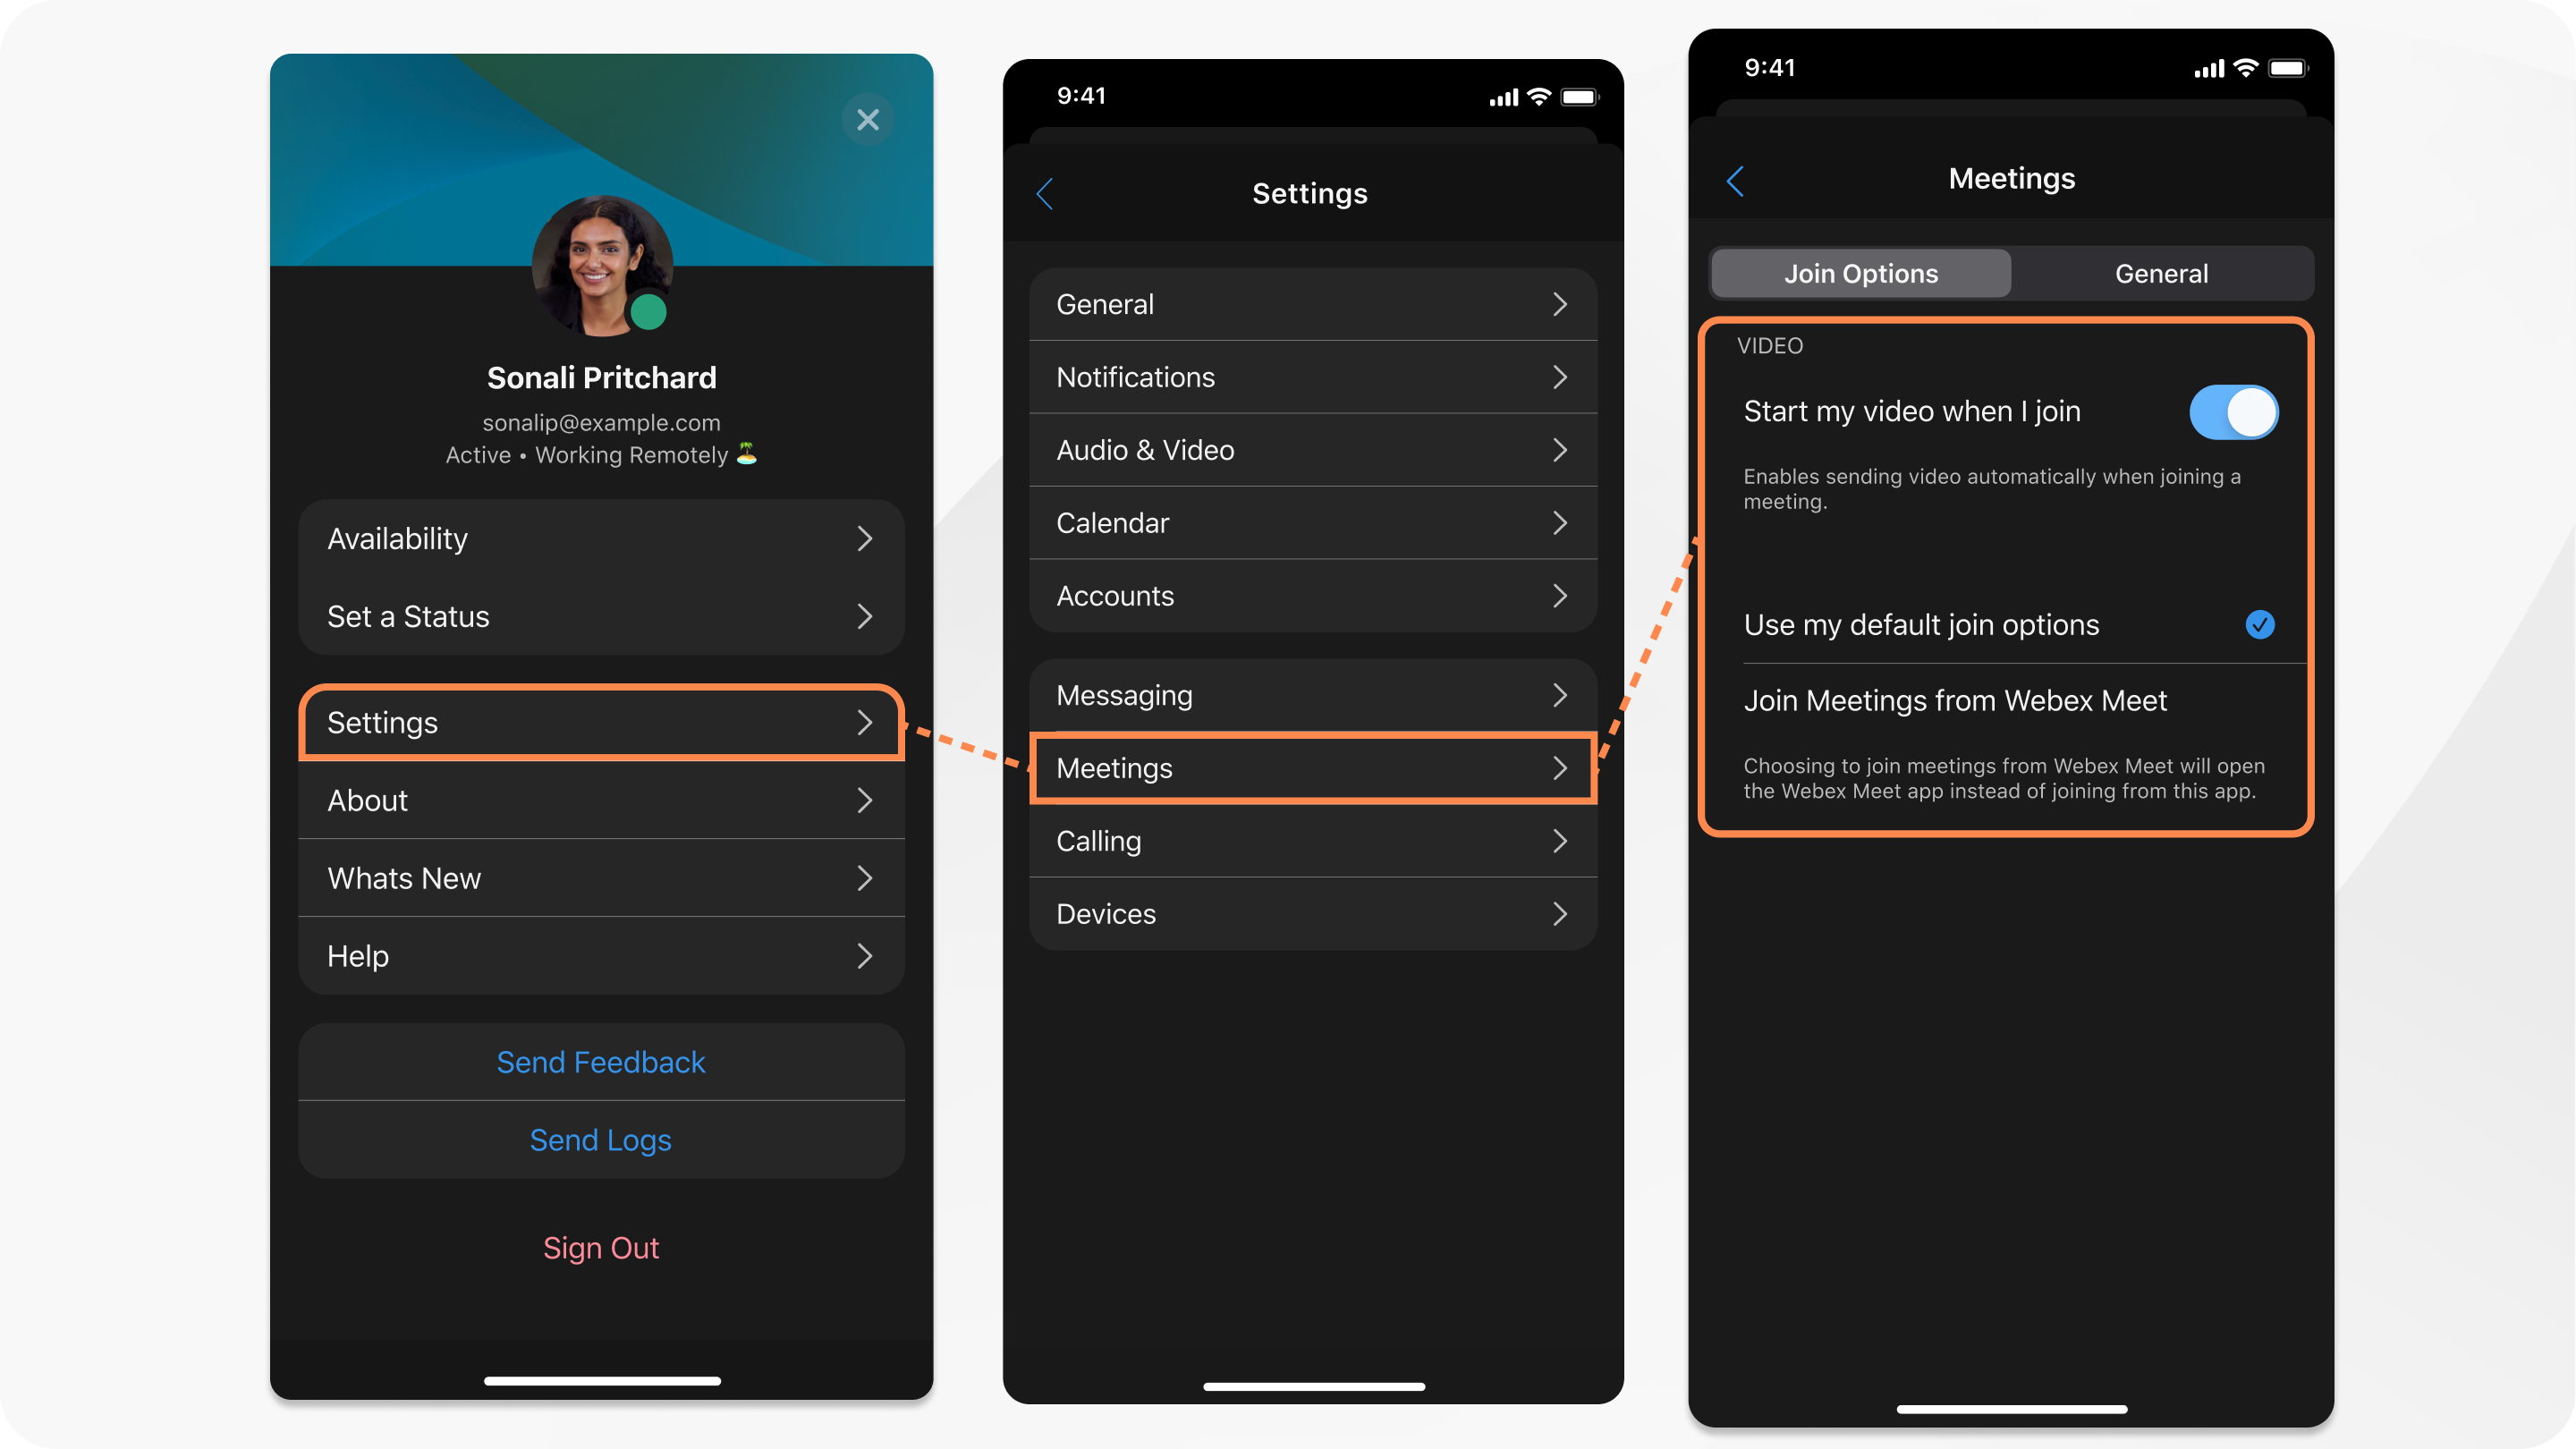 Automatically start your video when joining meetings.